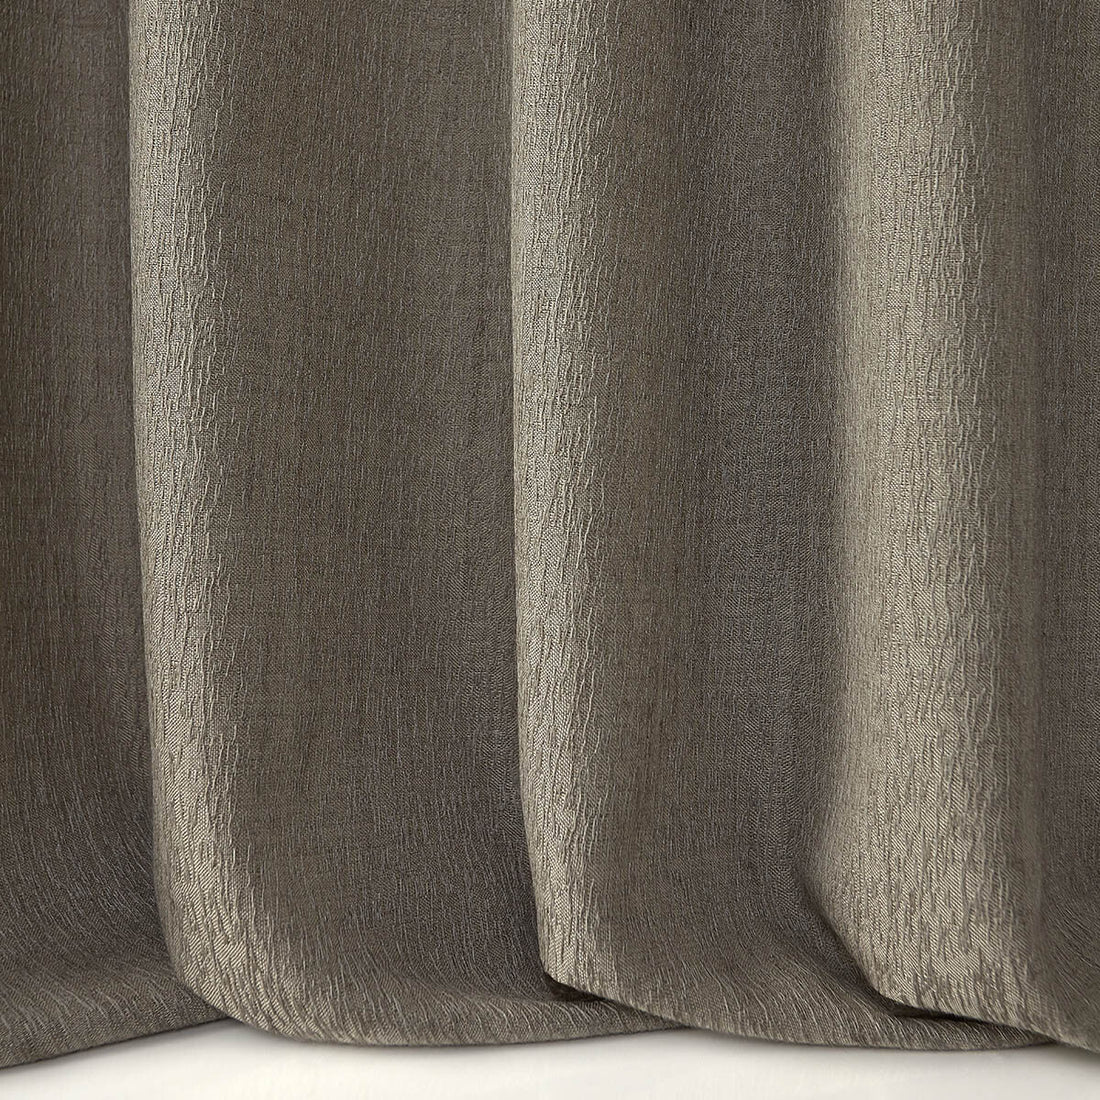 Testa fabric in 1 color - pattern LZ-30343.01.0 - by Kravet Design in the Lizzo collection